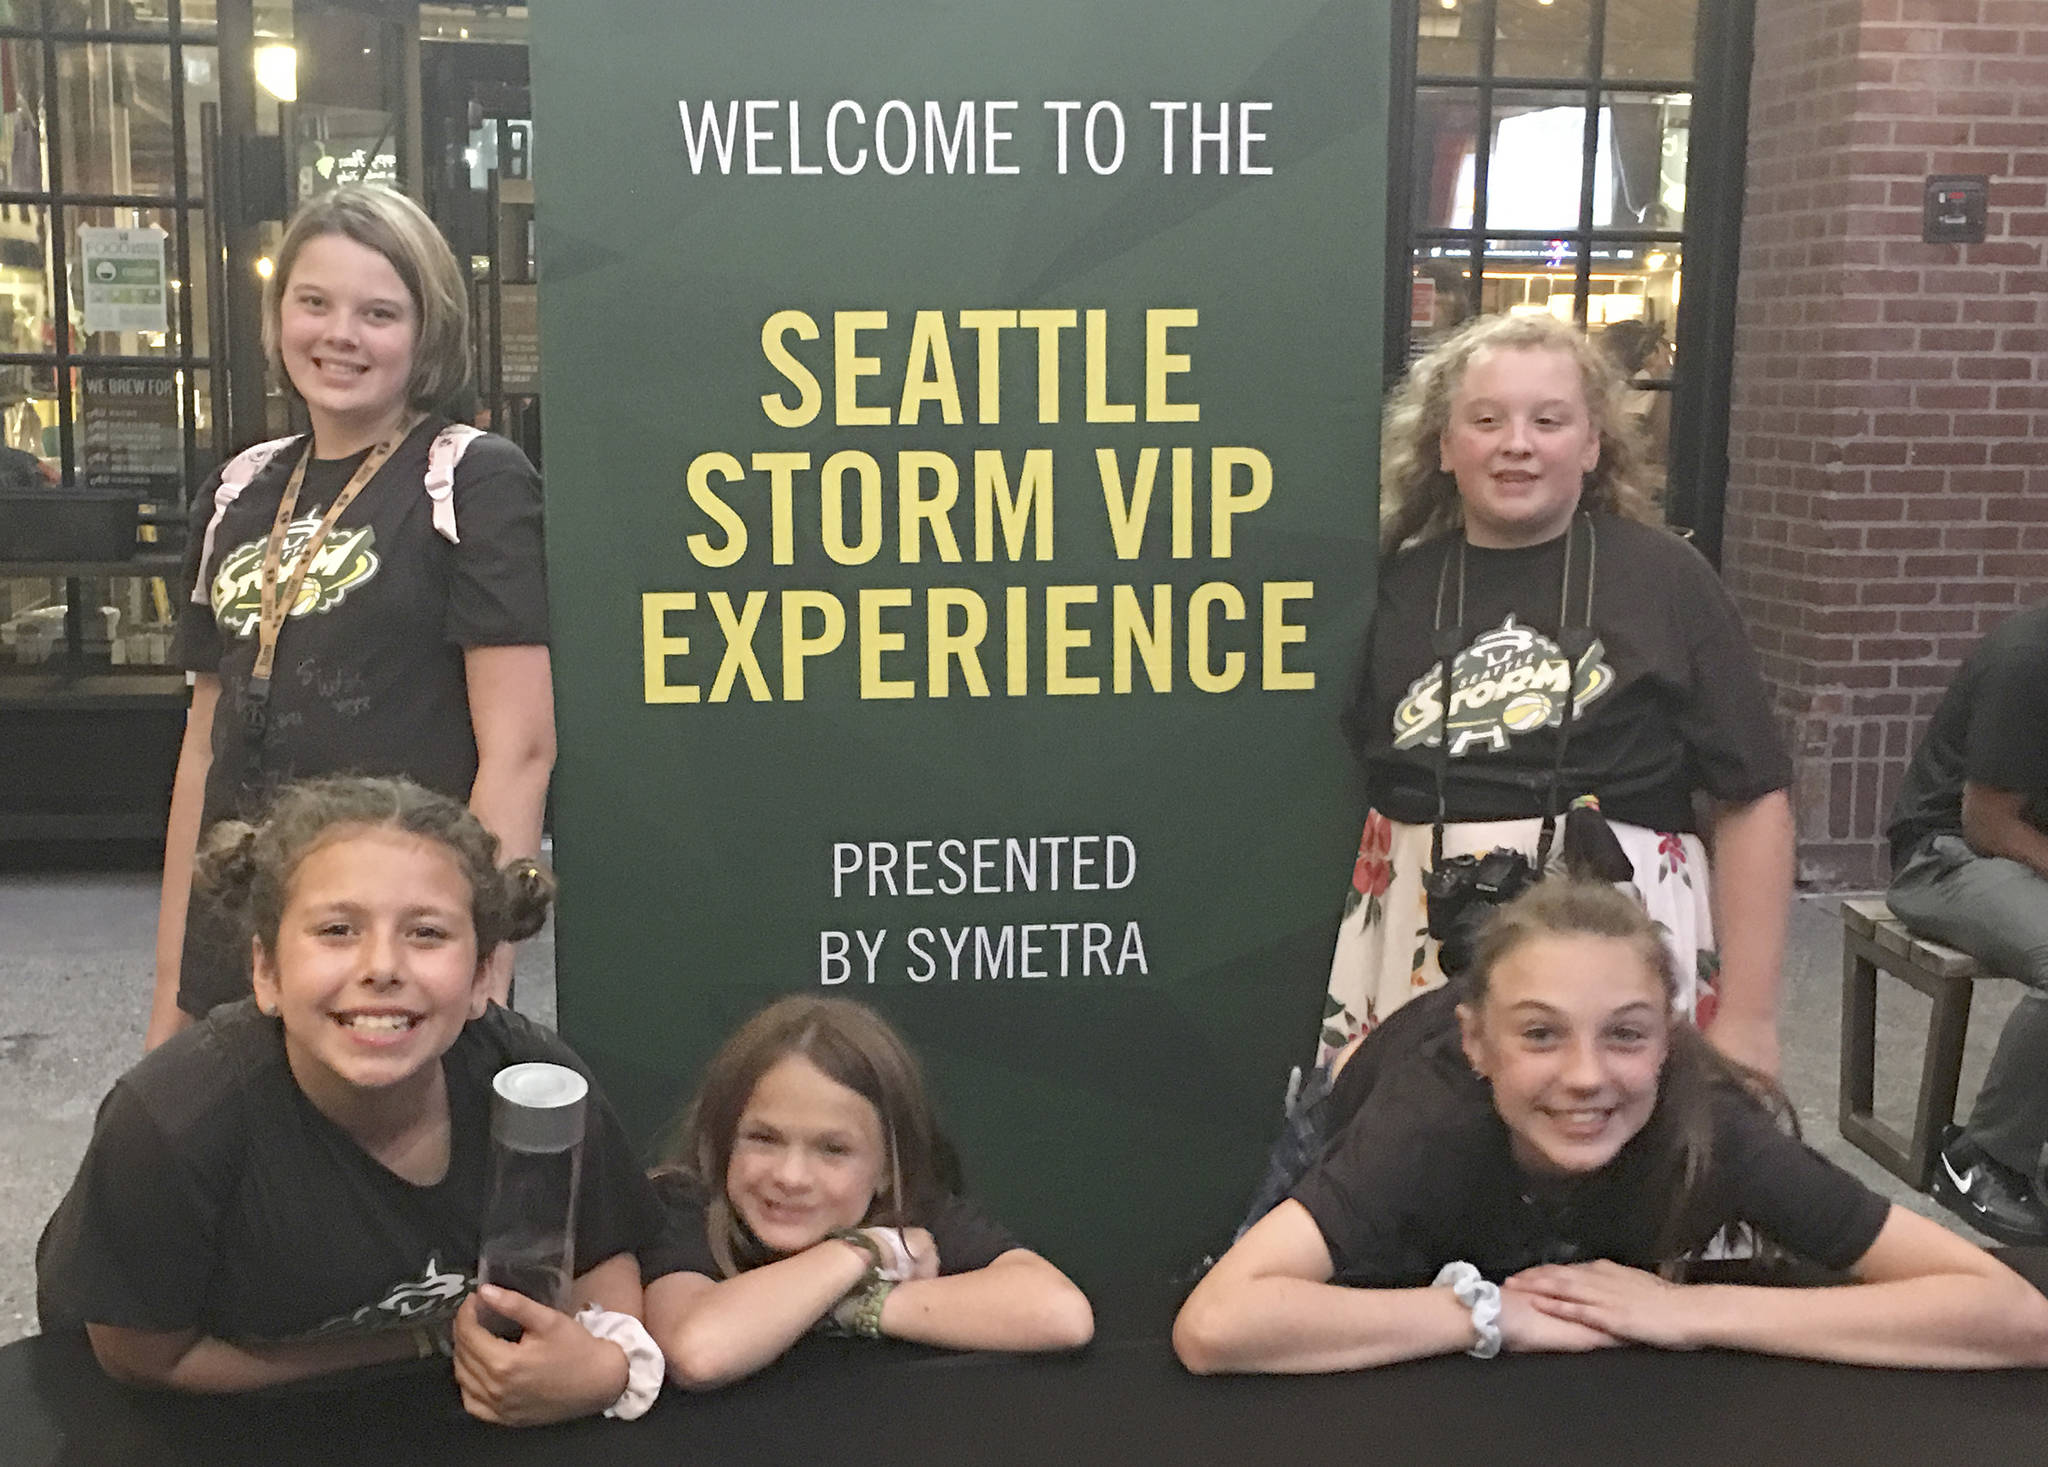 Members of the Sequim Boys & Girls Club visit with the Seattle Storm basketball team earlier this month at Swedish Hospital in Seattle, playing games and hanging out with the WNBA players. Submitted photo